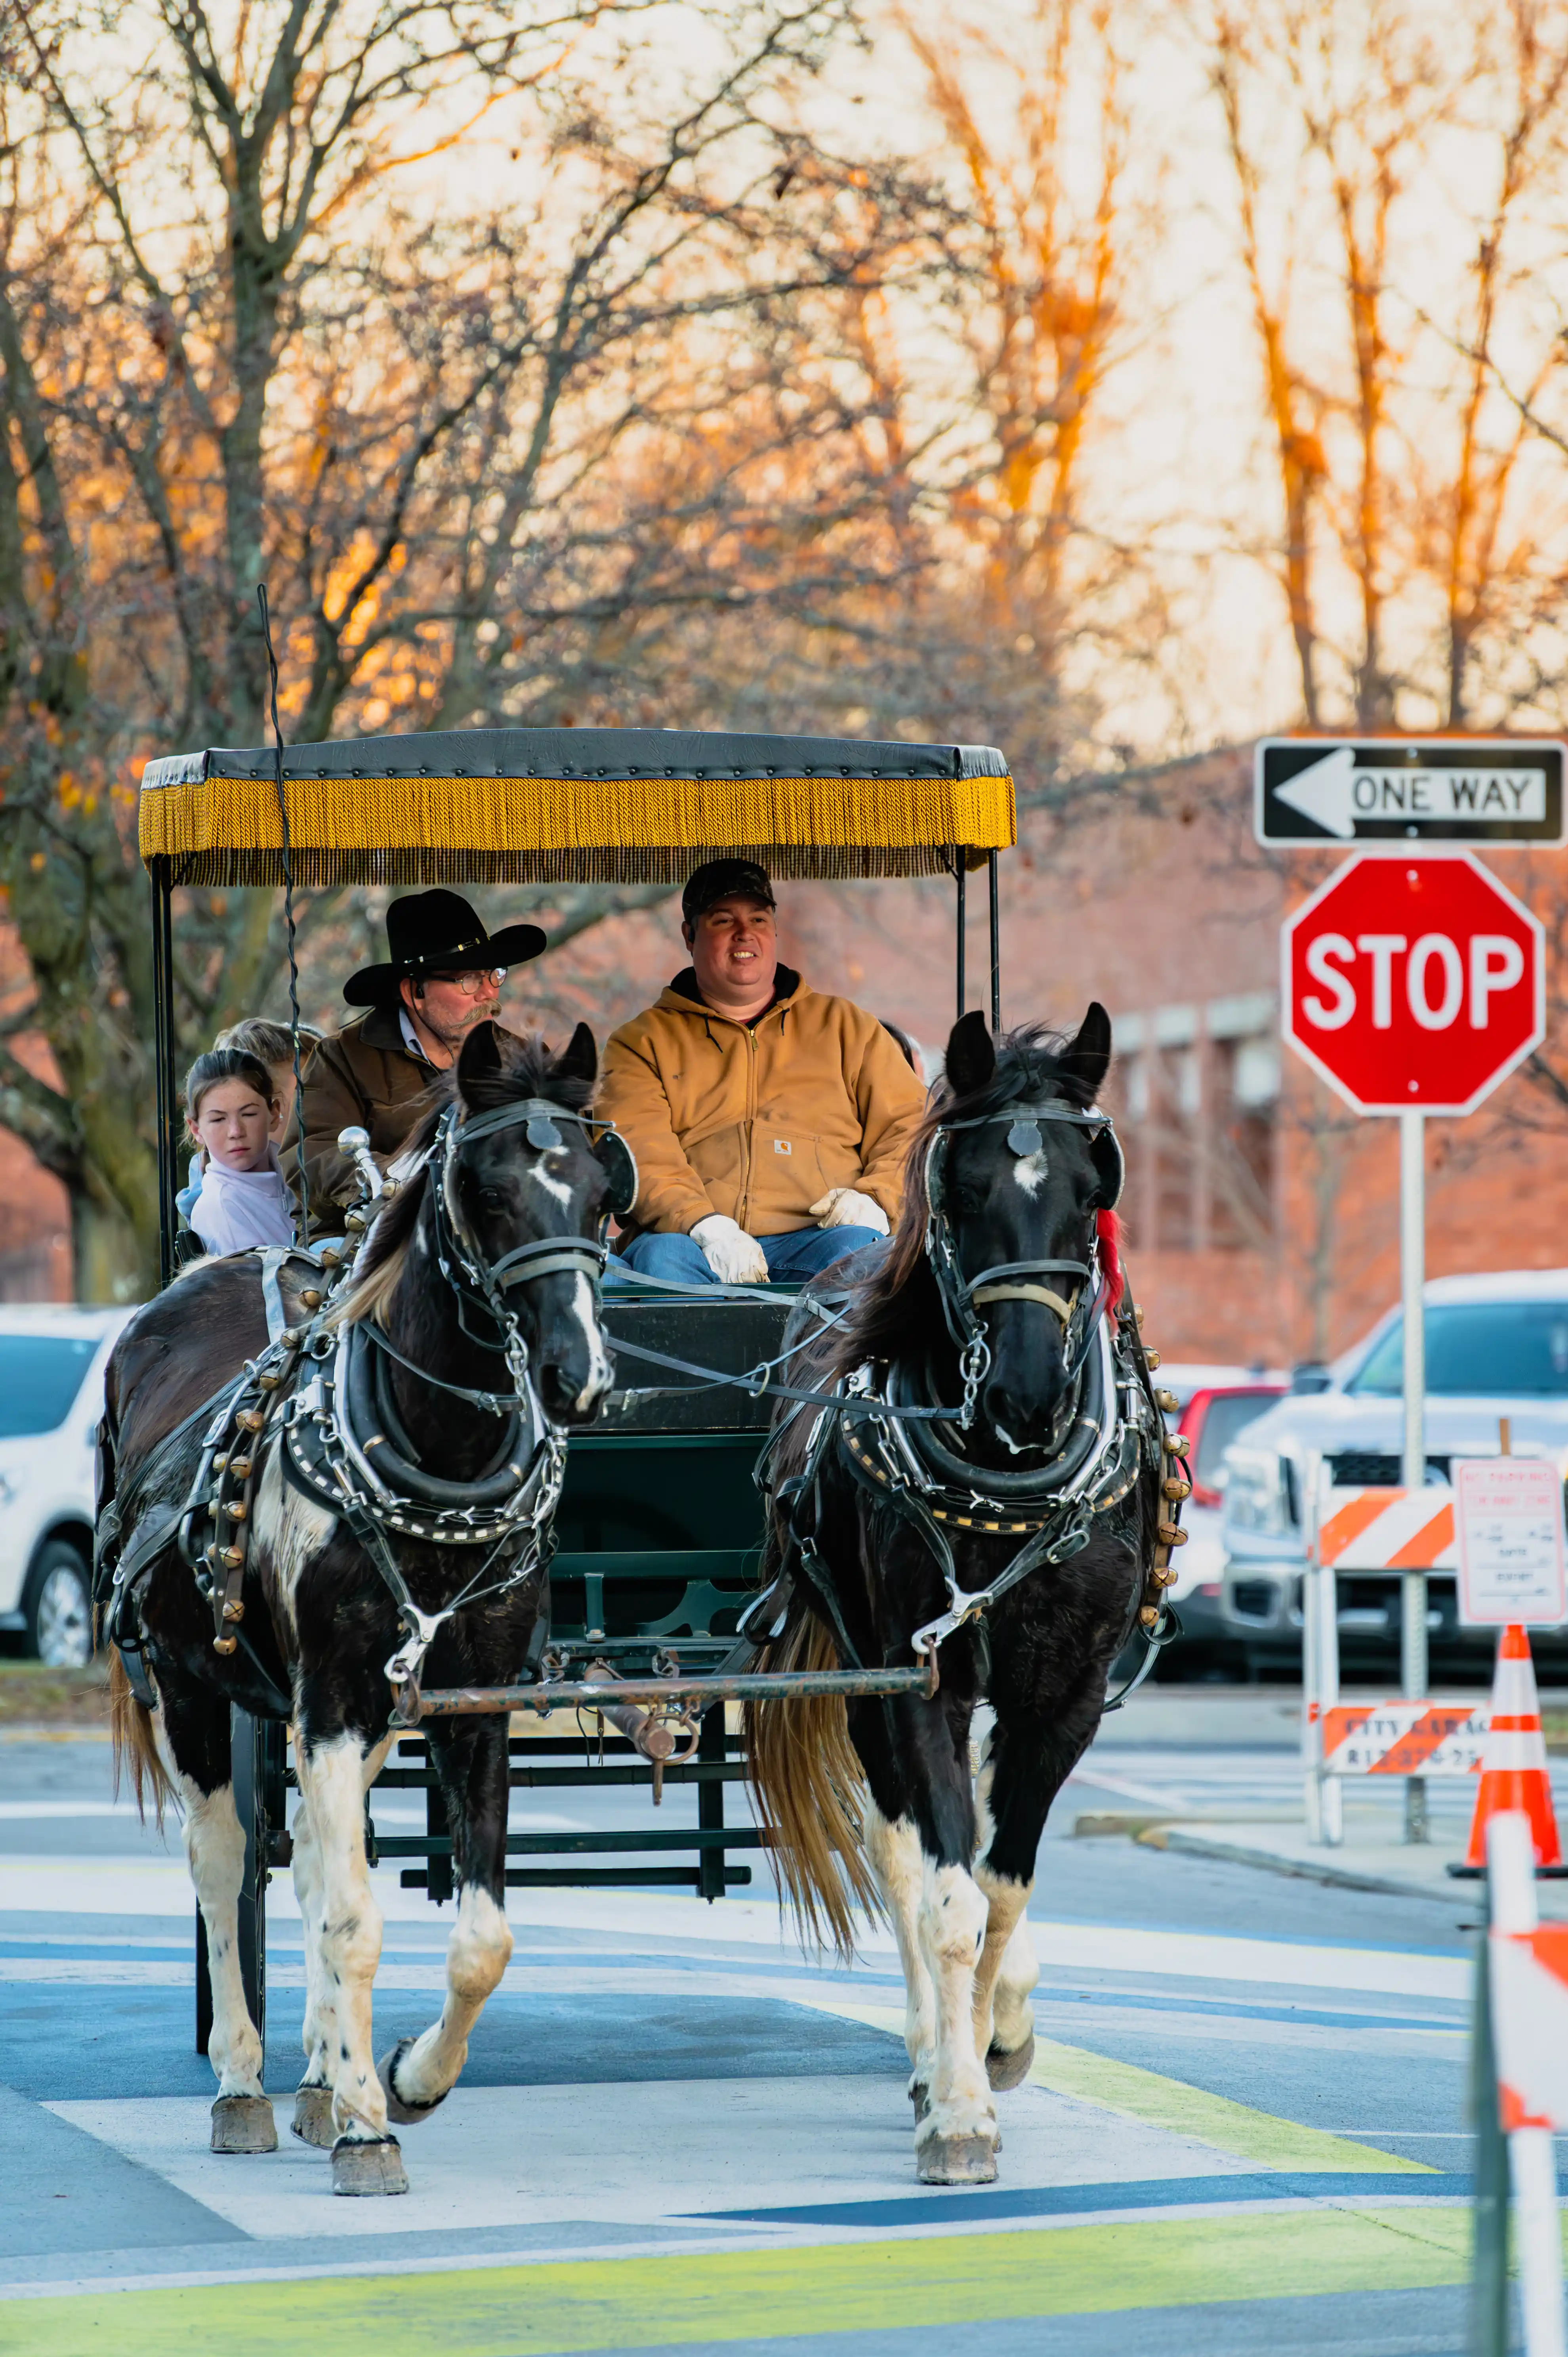 Horse-drawn carriage on city street with passengers and driver stopping at a STOP sign.